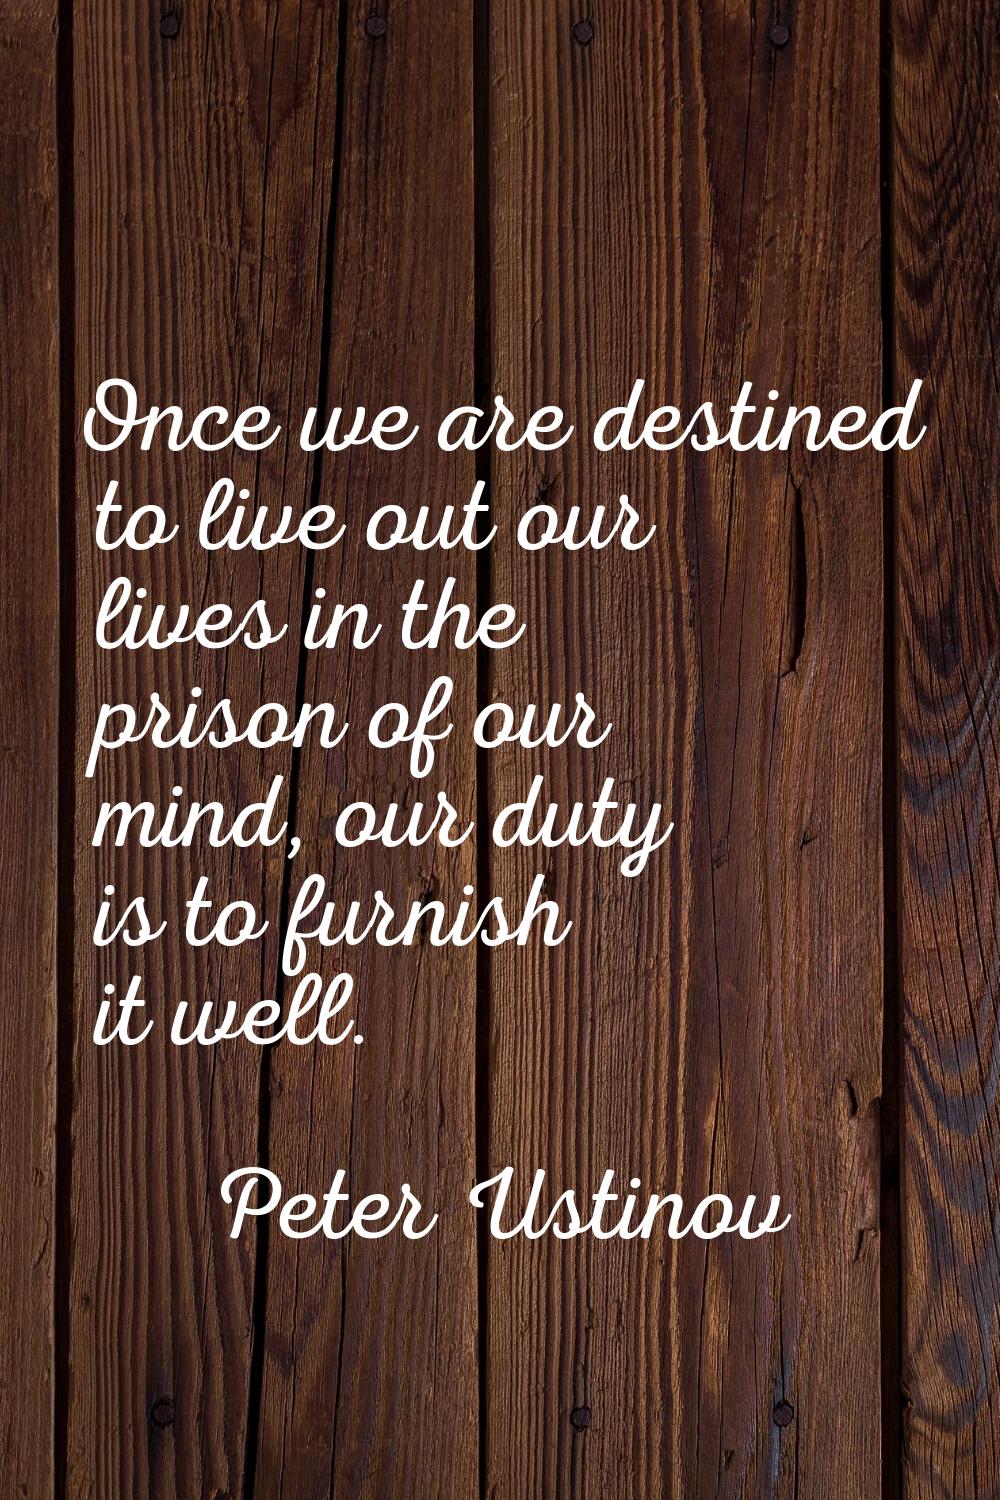 Once we are destined to live out our lives in the prison of our mind, our duty is to furnish it wel